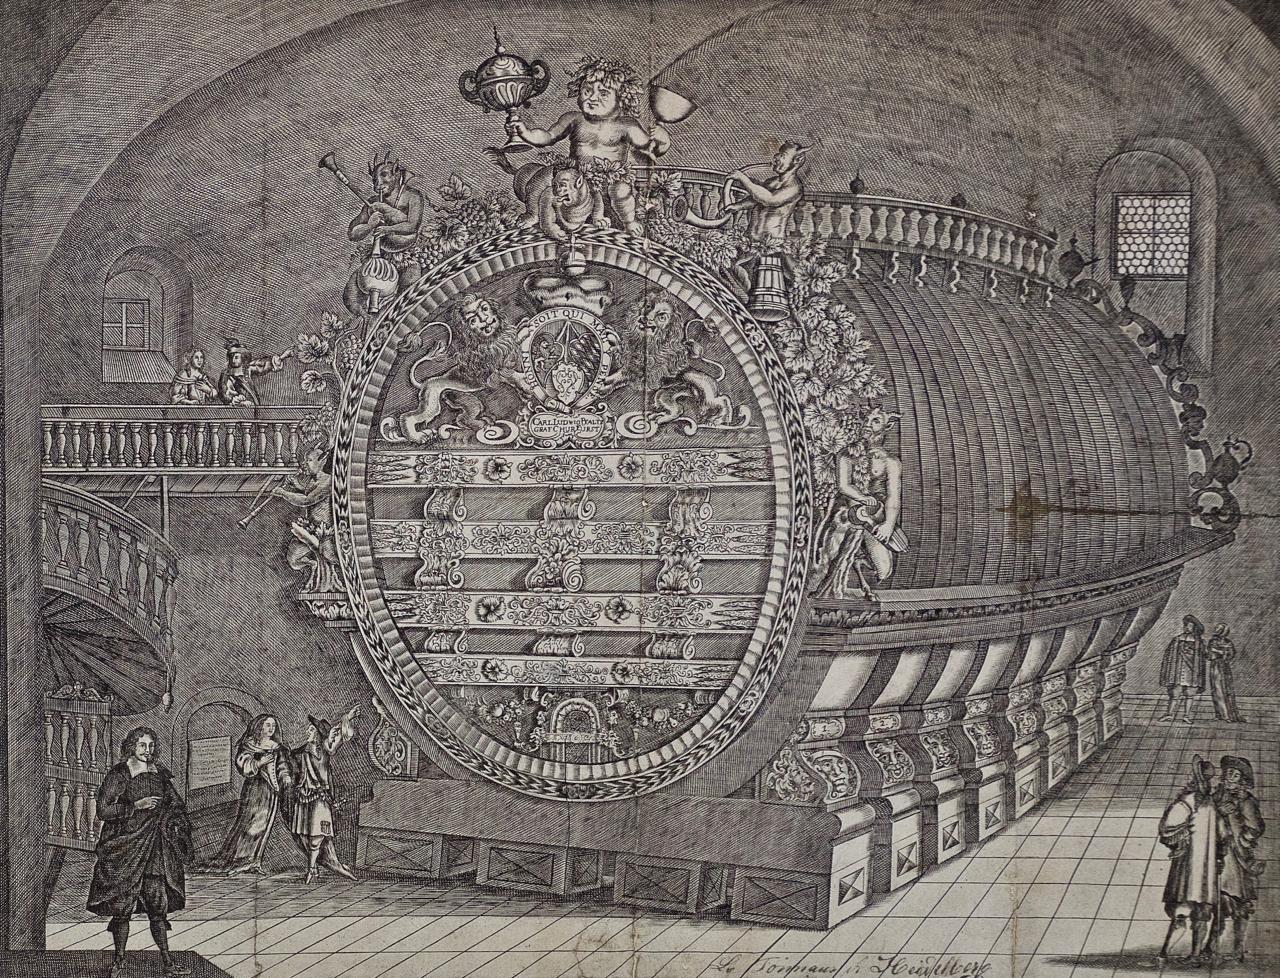 The Heidelberg Tun: A Framed 17th Century Engraving of a Huge Wine Cask - Print by Unknown